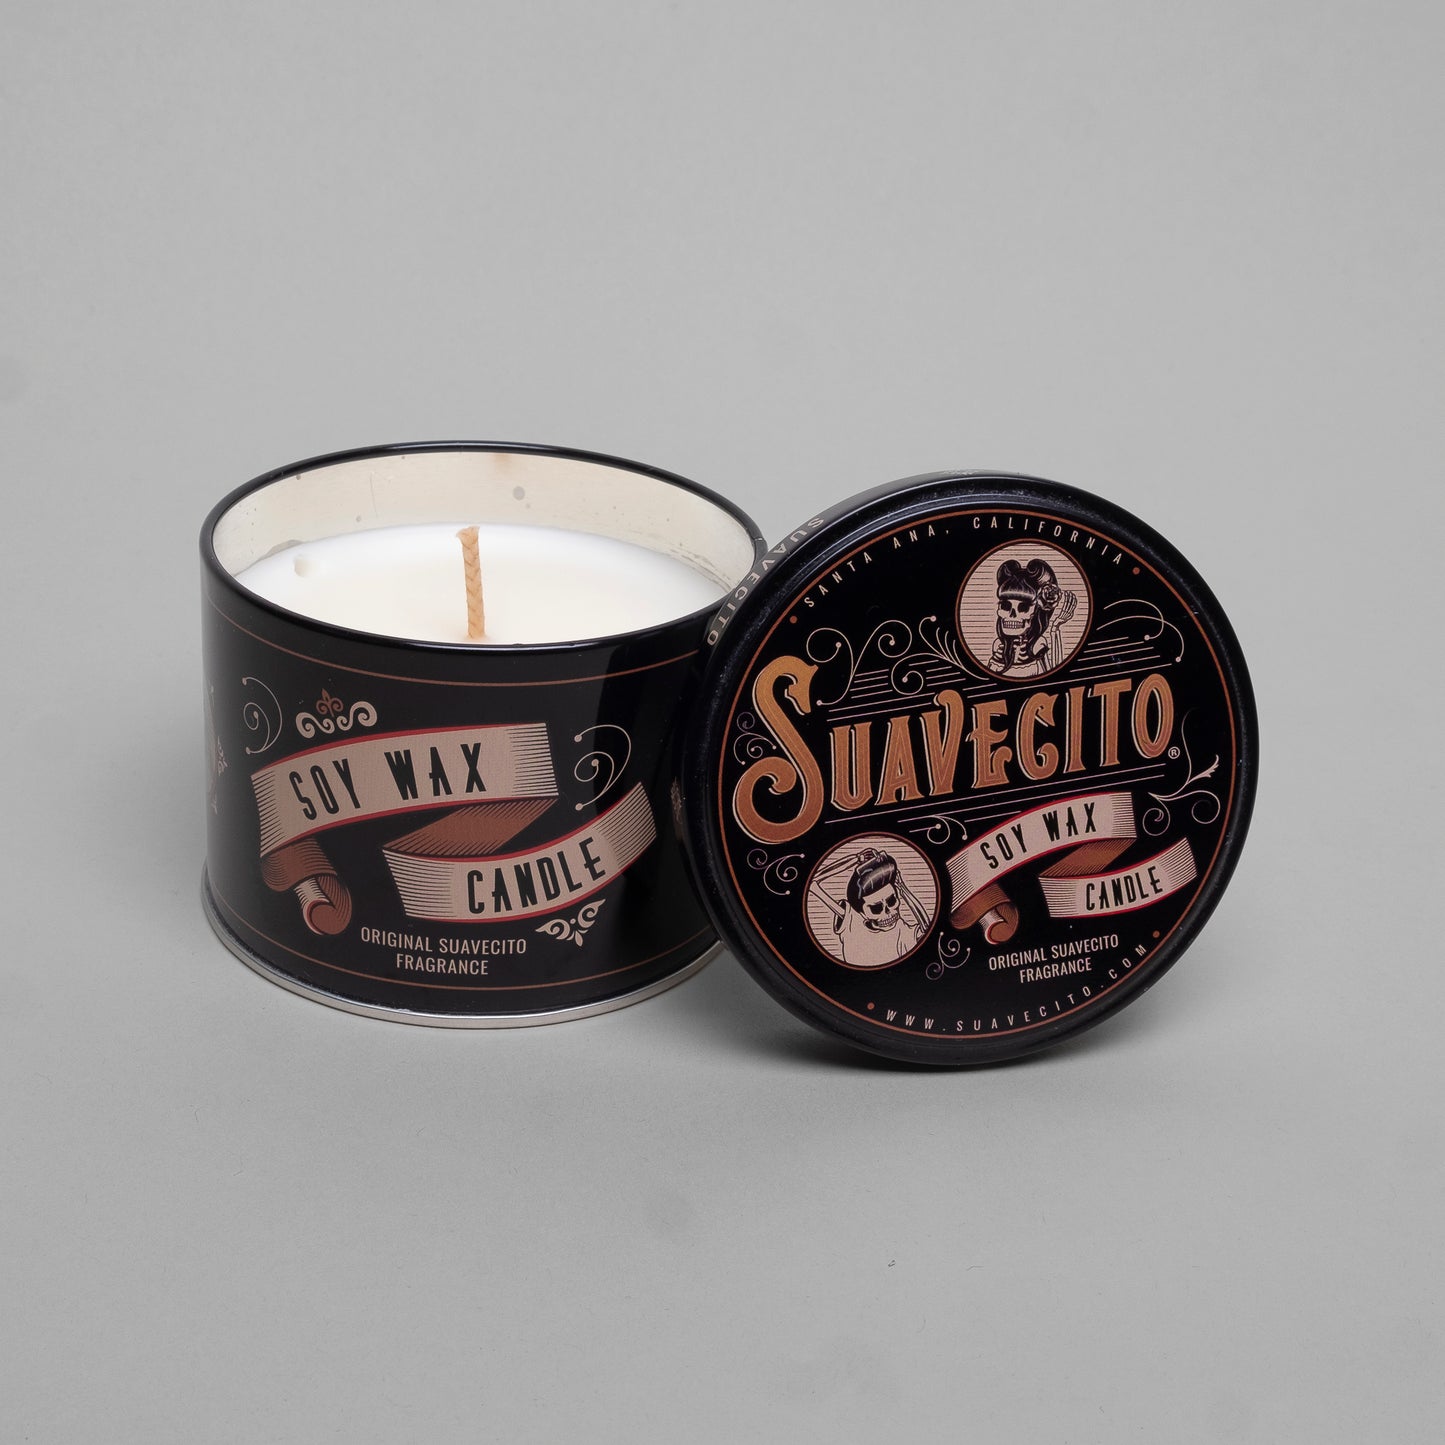 SUAVECITO - SOY WAX CANDLE